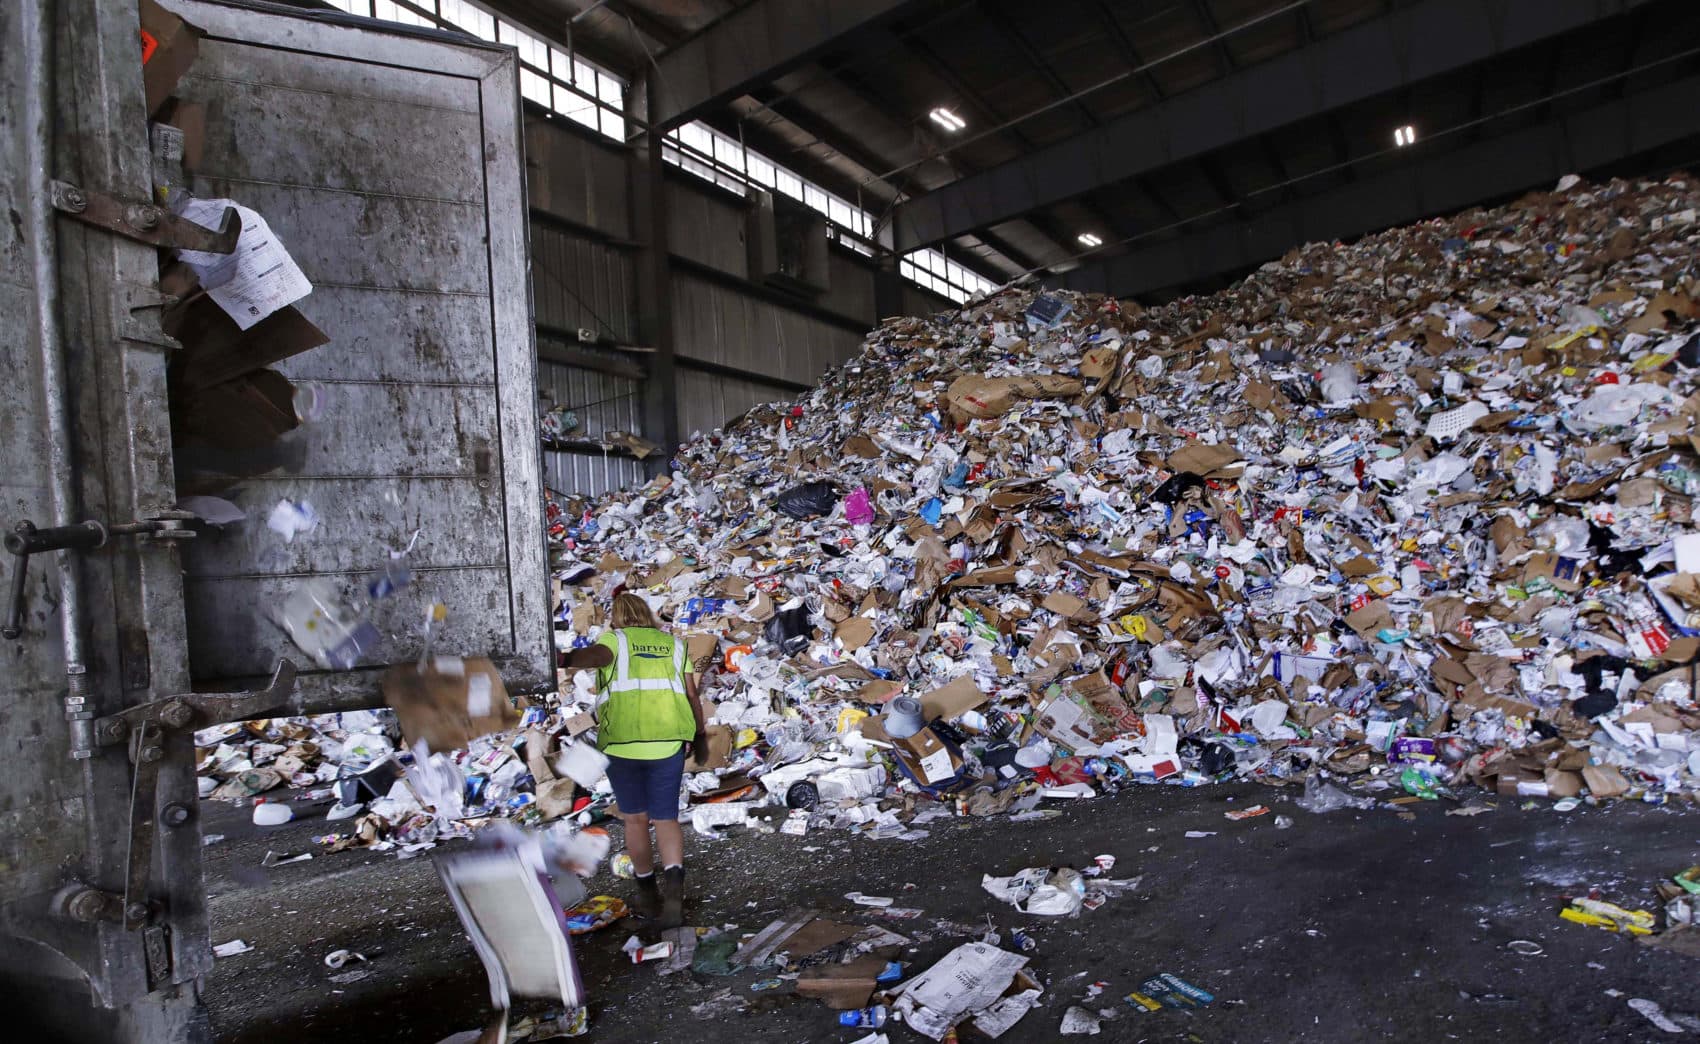 In this 2018 file photo, a trailer door is opened on a truck filled with unsorted recyclable refuse as it is offloaded and added to a giant pile in a processing building at EL Harvey &amp; Sons, a waste and recycling company in Westborough. (Charles Krupa/AP)